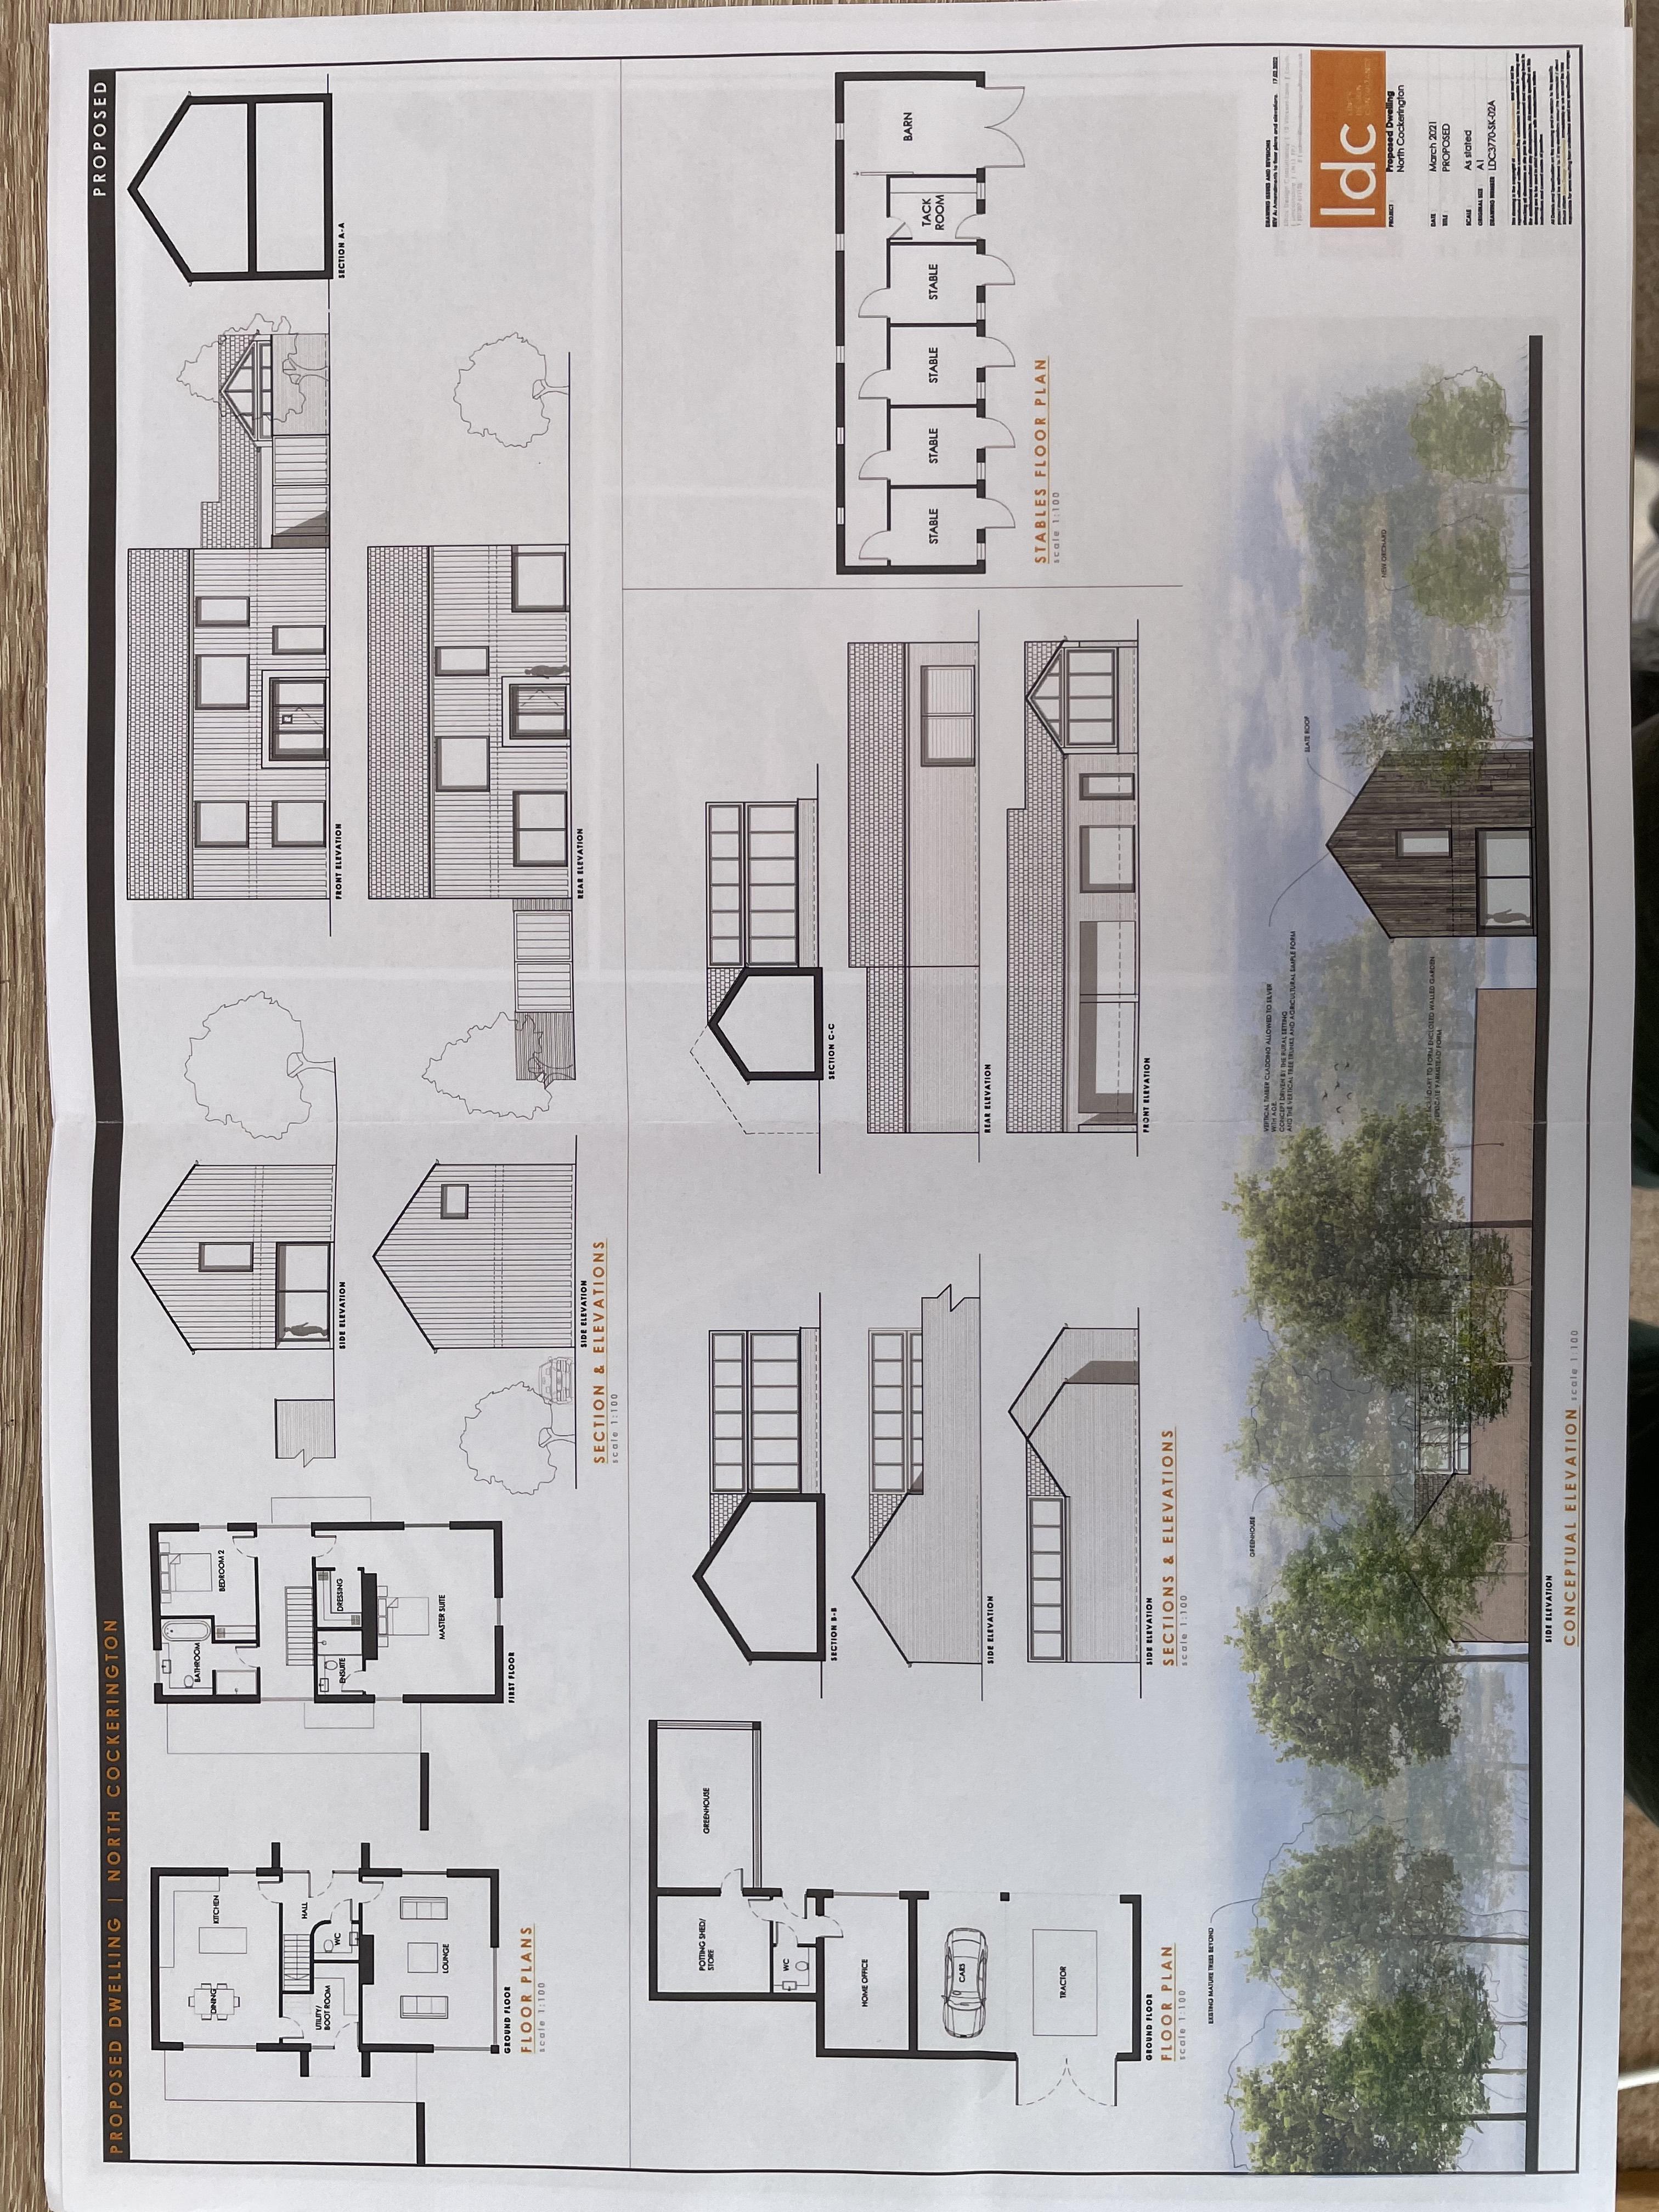 Plans of proposed development